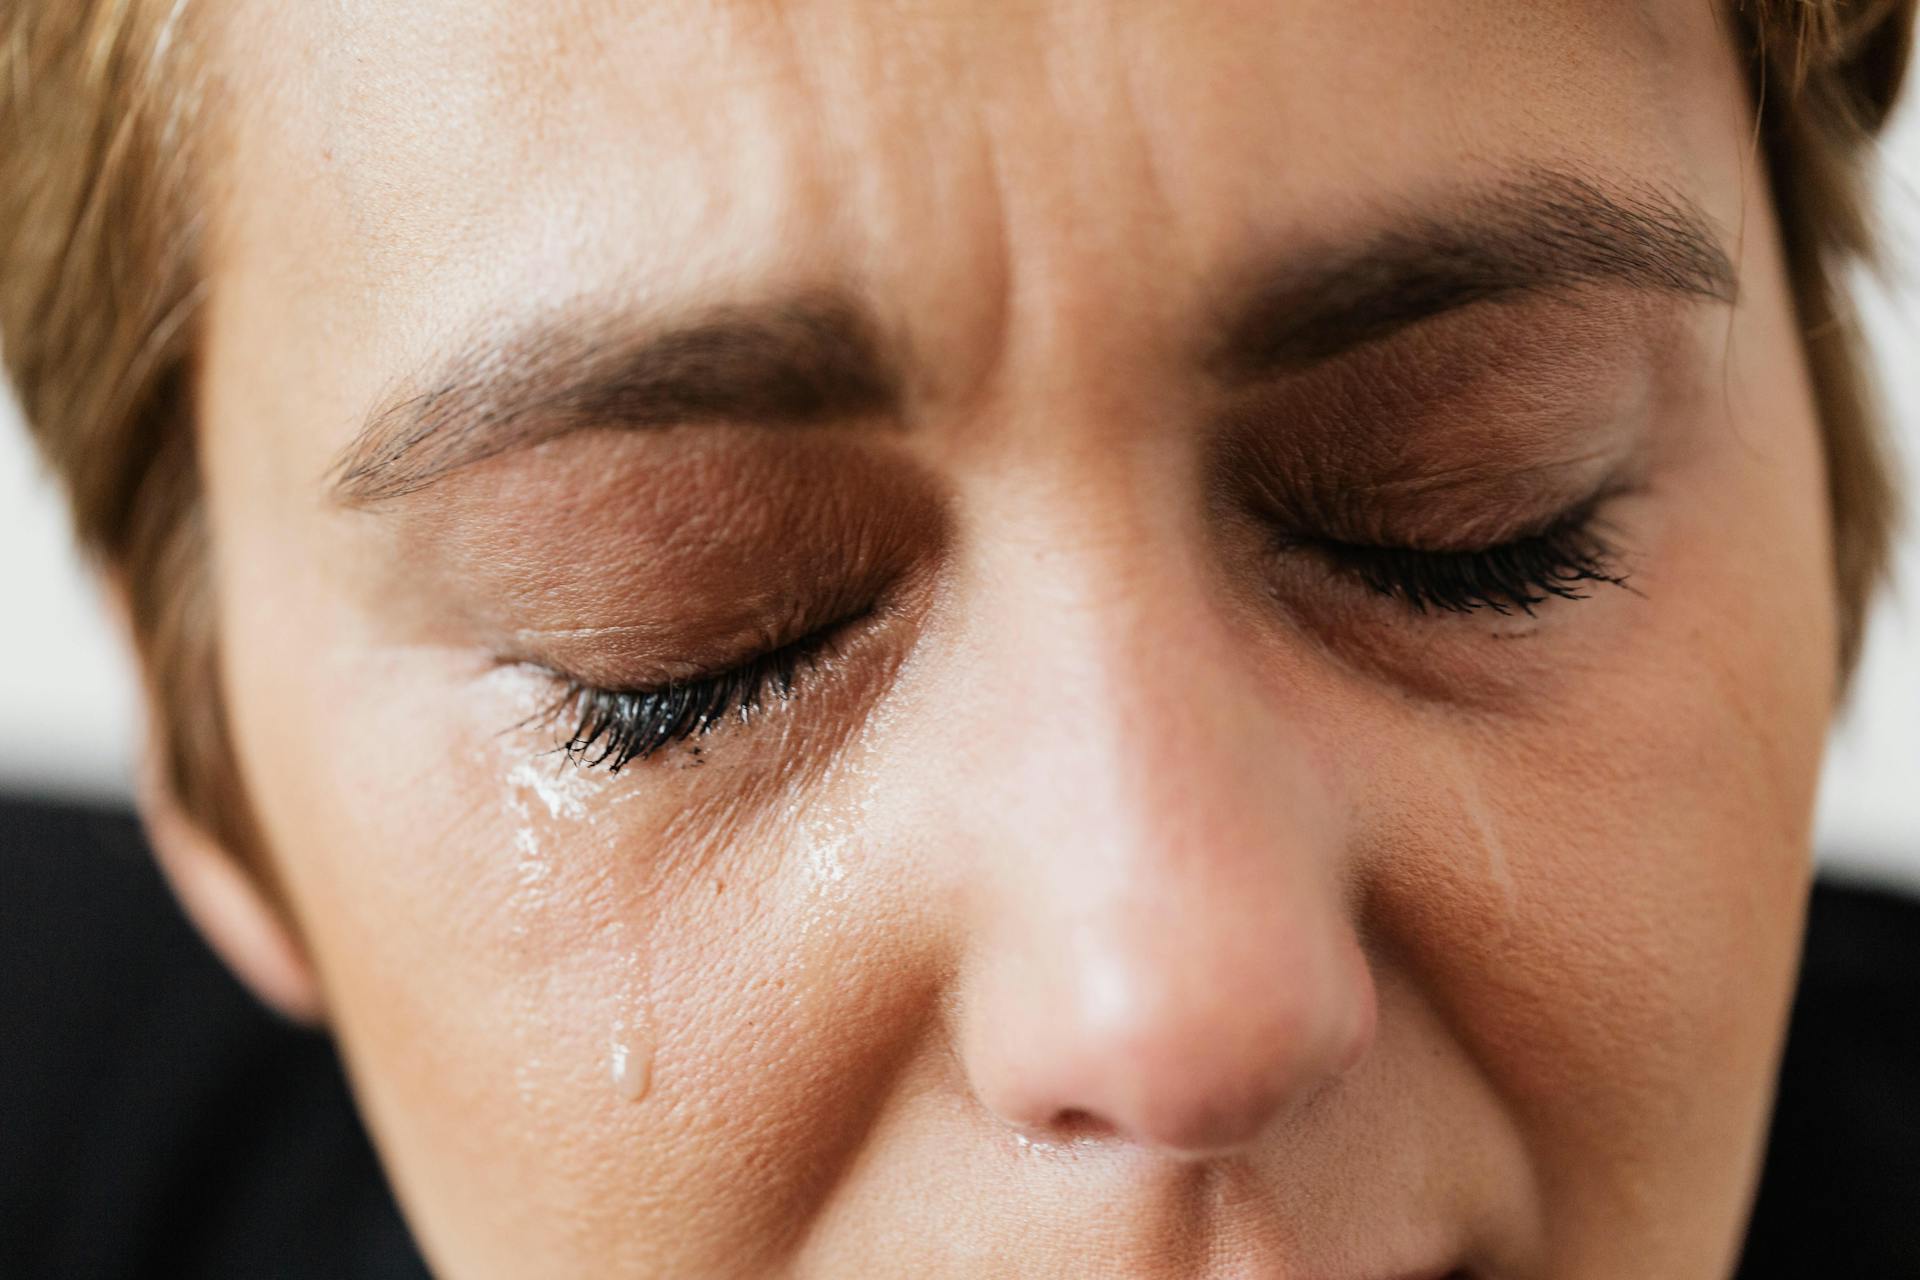 Tears streaming down a woman's face | Source: Pexels